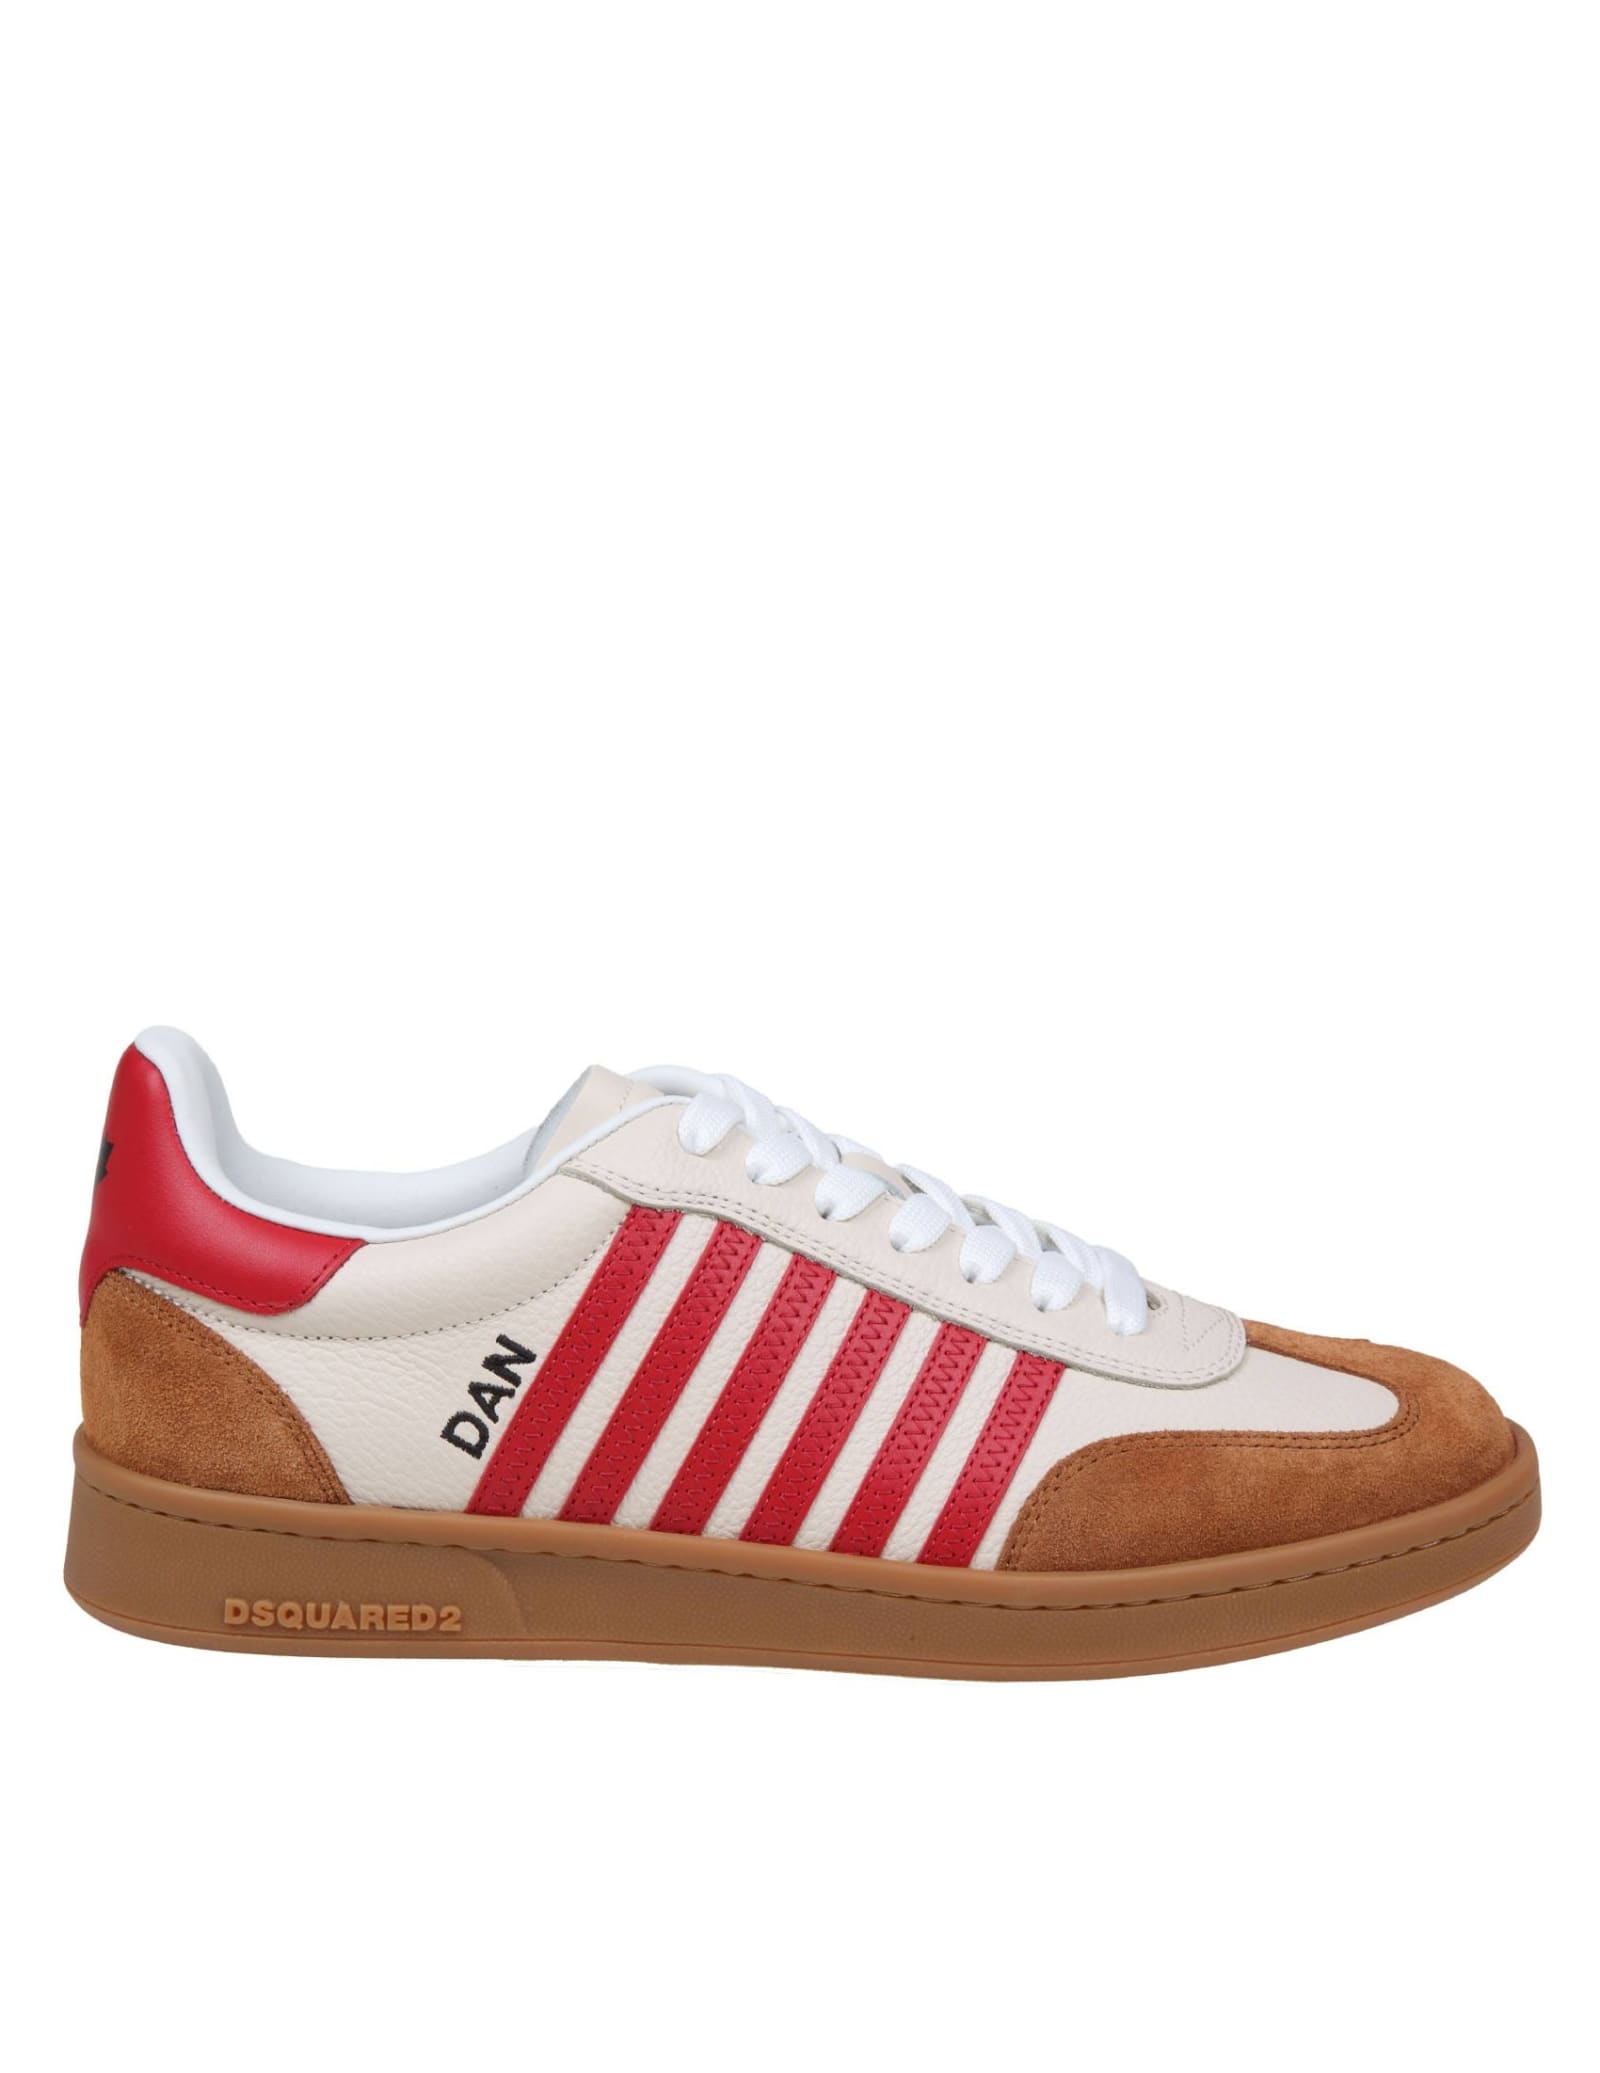 Boxer Sneakers In White/red Leather And Suede